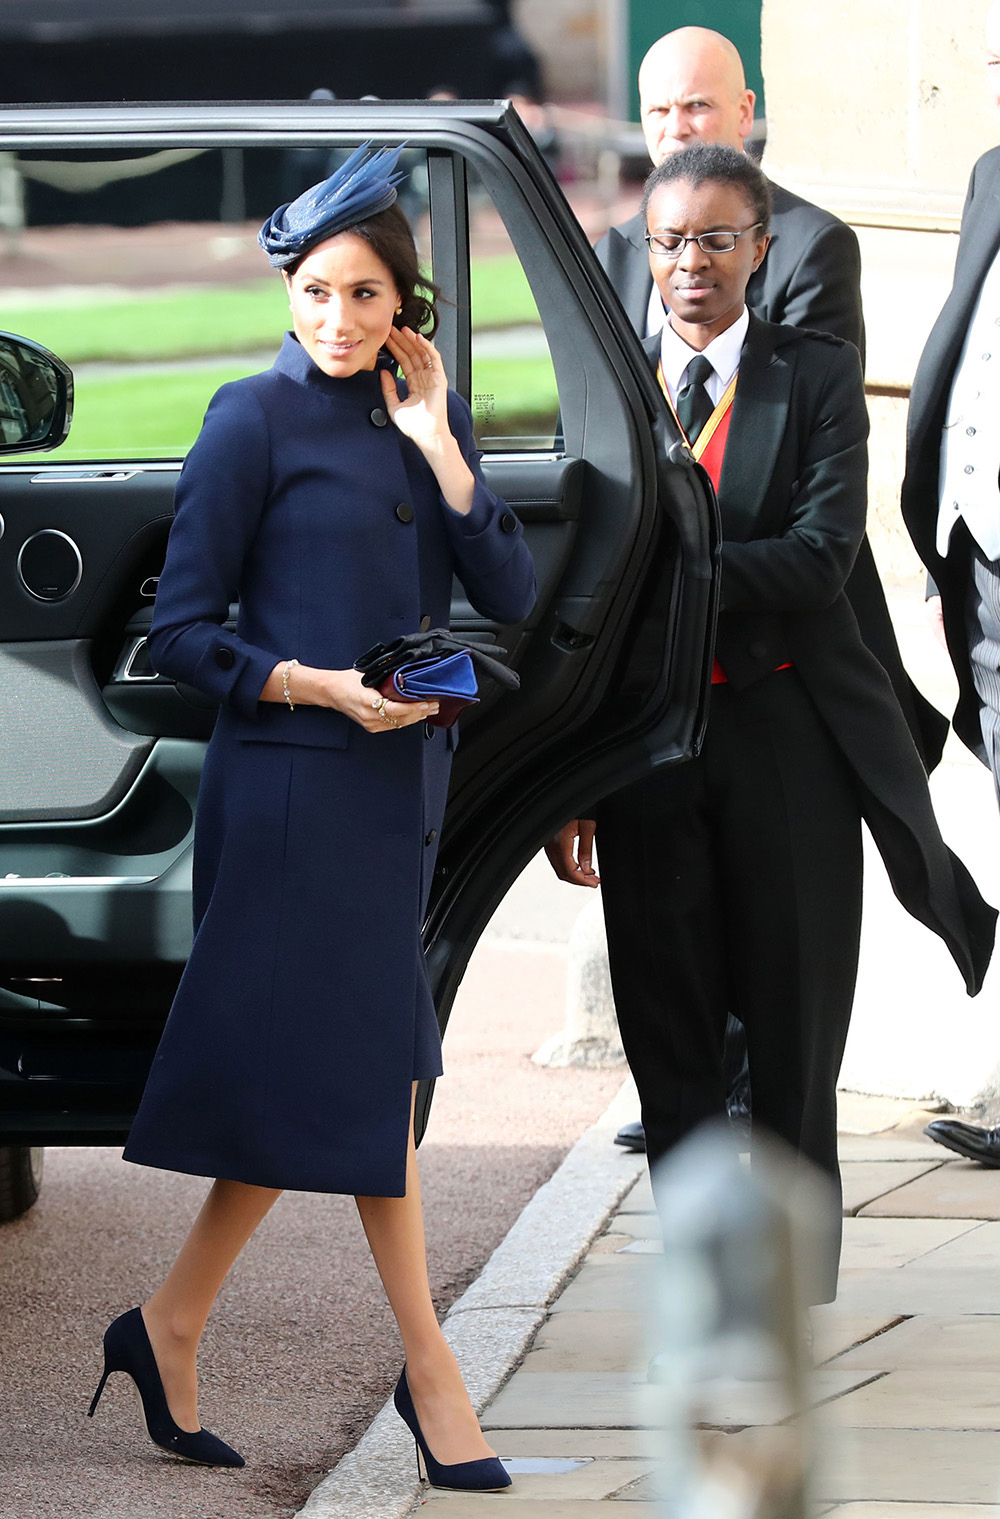 October 12, 2018: Five months following her wedding to Prince Harry, Meghan, Duchess of Sussex arrives at the same venue in the same designer to attend the nuptials of Princess Eugenie and Jack Brooksbank. The regal navy look by Givenchy wasn't short on modern Meghan's style, however. Teaming it with a hat by Noel Stewart and a cluster of unusually heavy gold rings on her right hand by Pippa Small, the Duchess has caused a sell out for the ethical designer. 